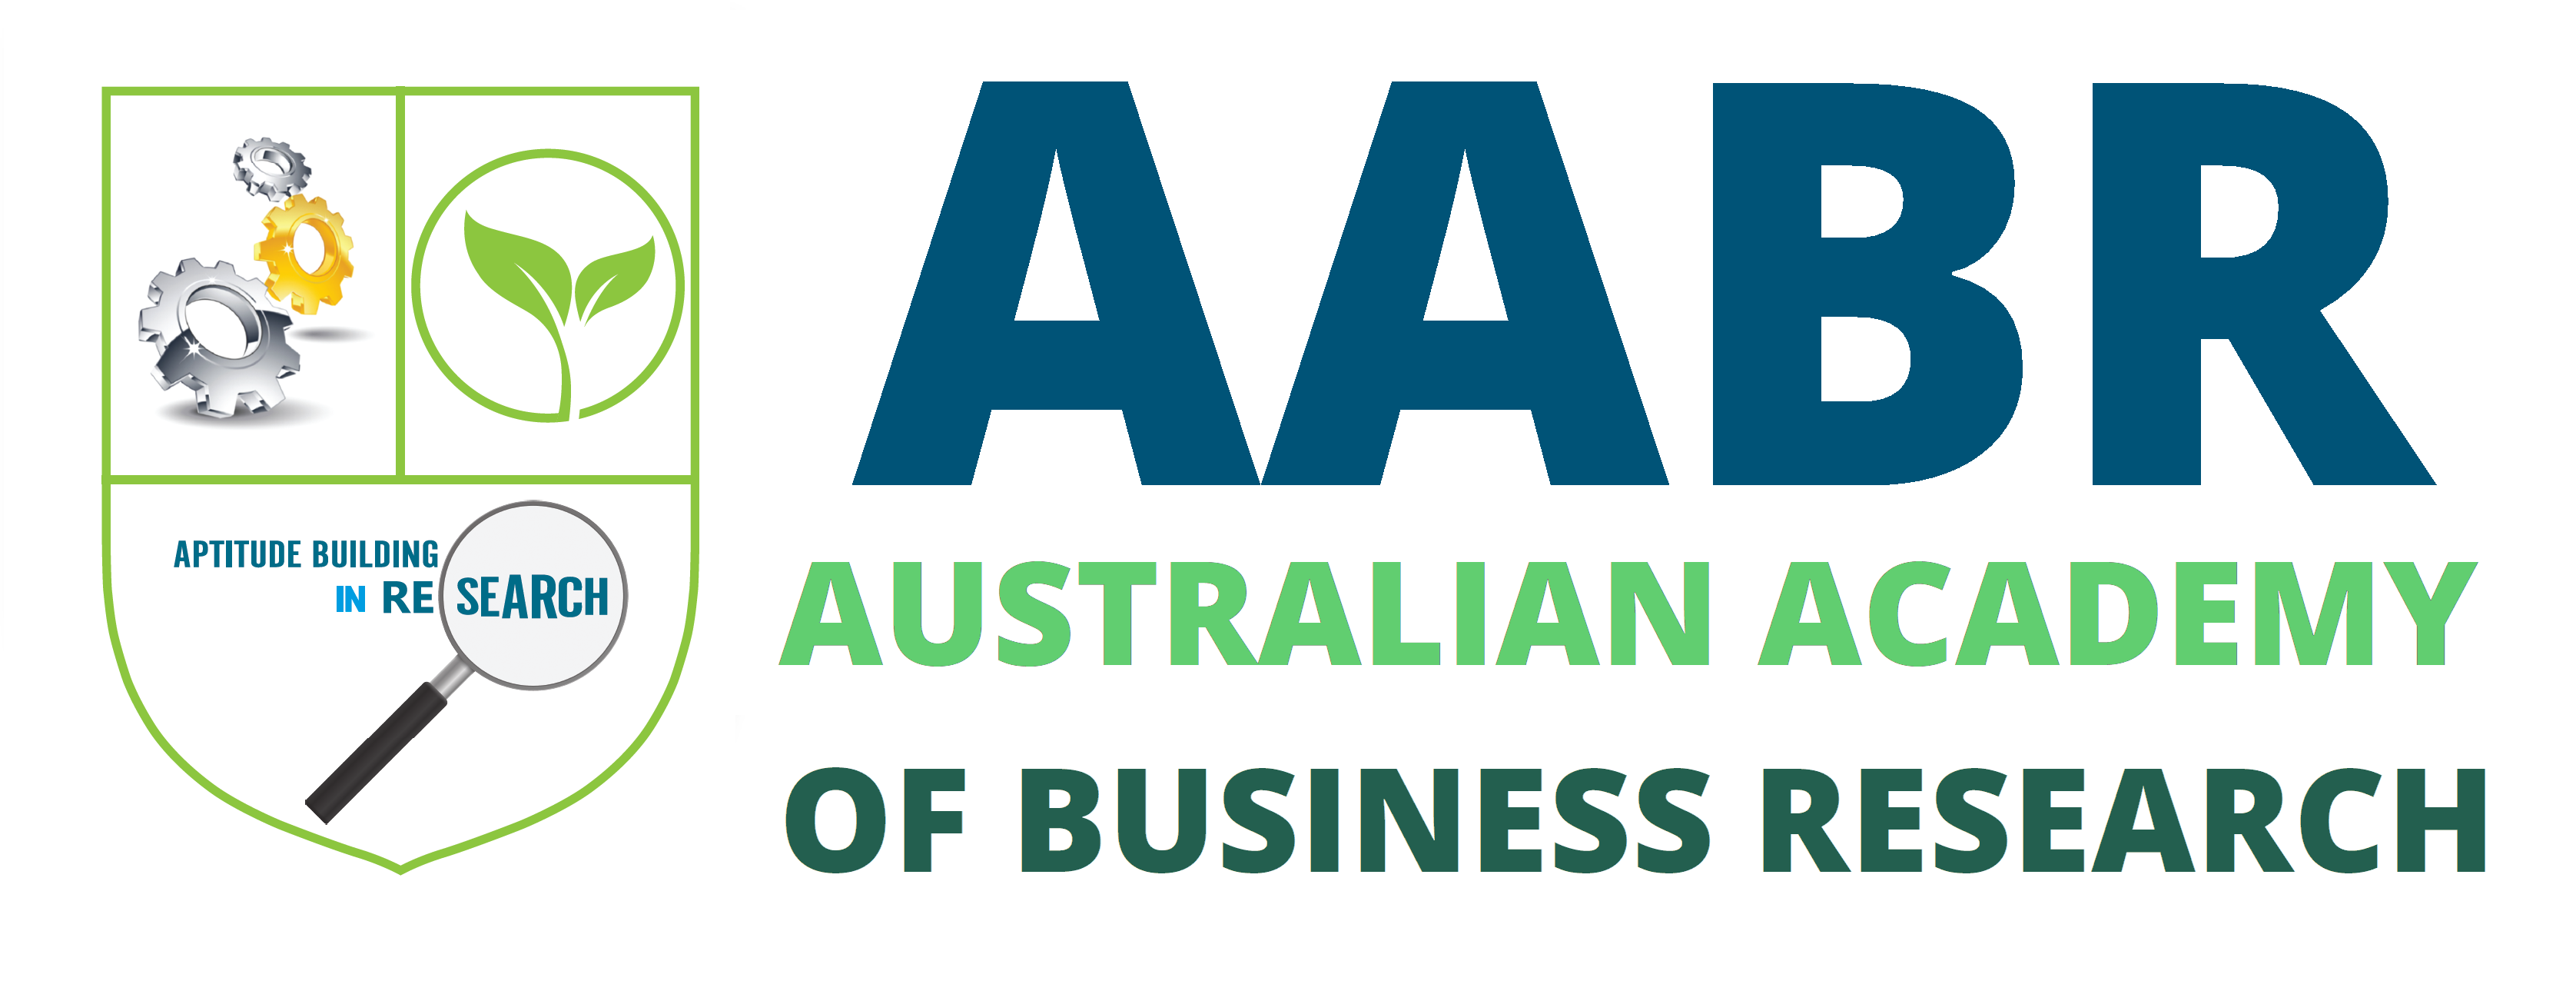 Australian Academy of Business Research, Development and Training